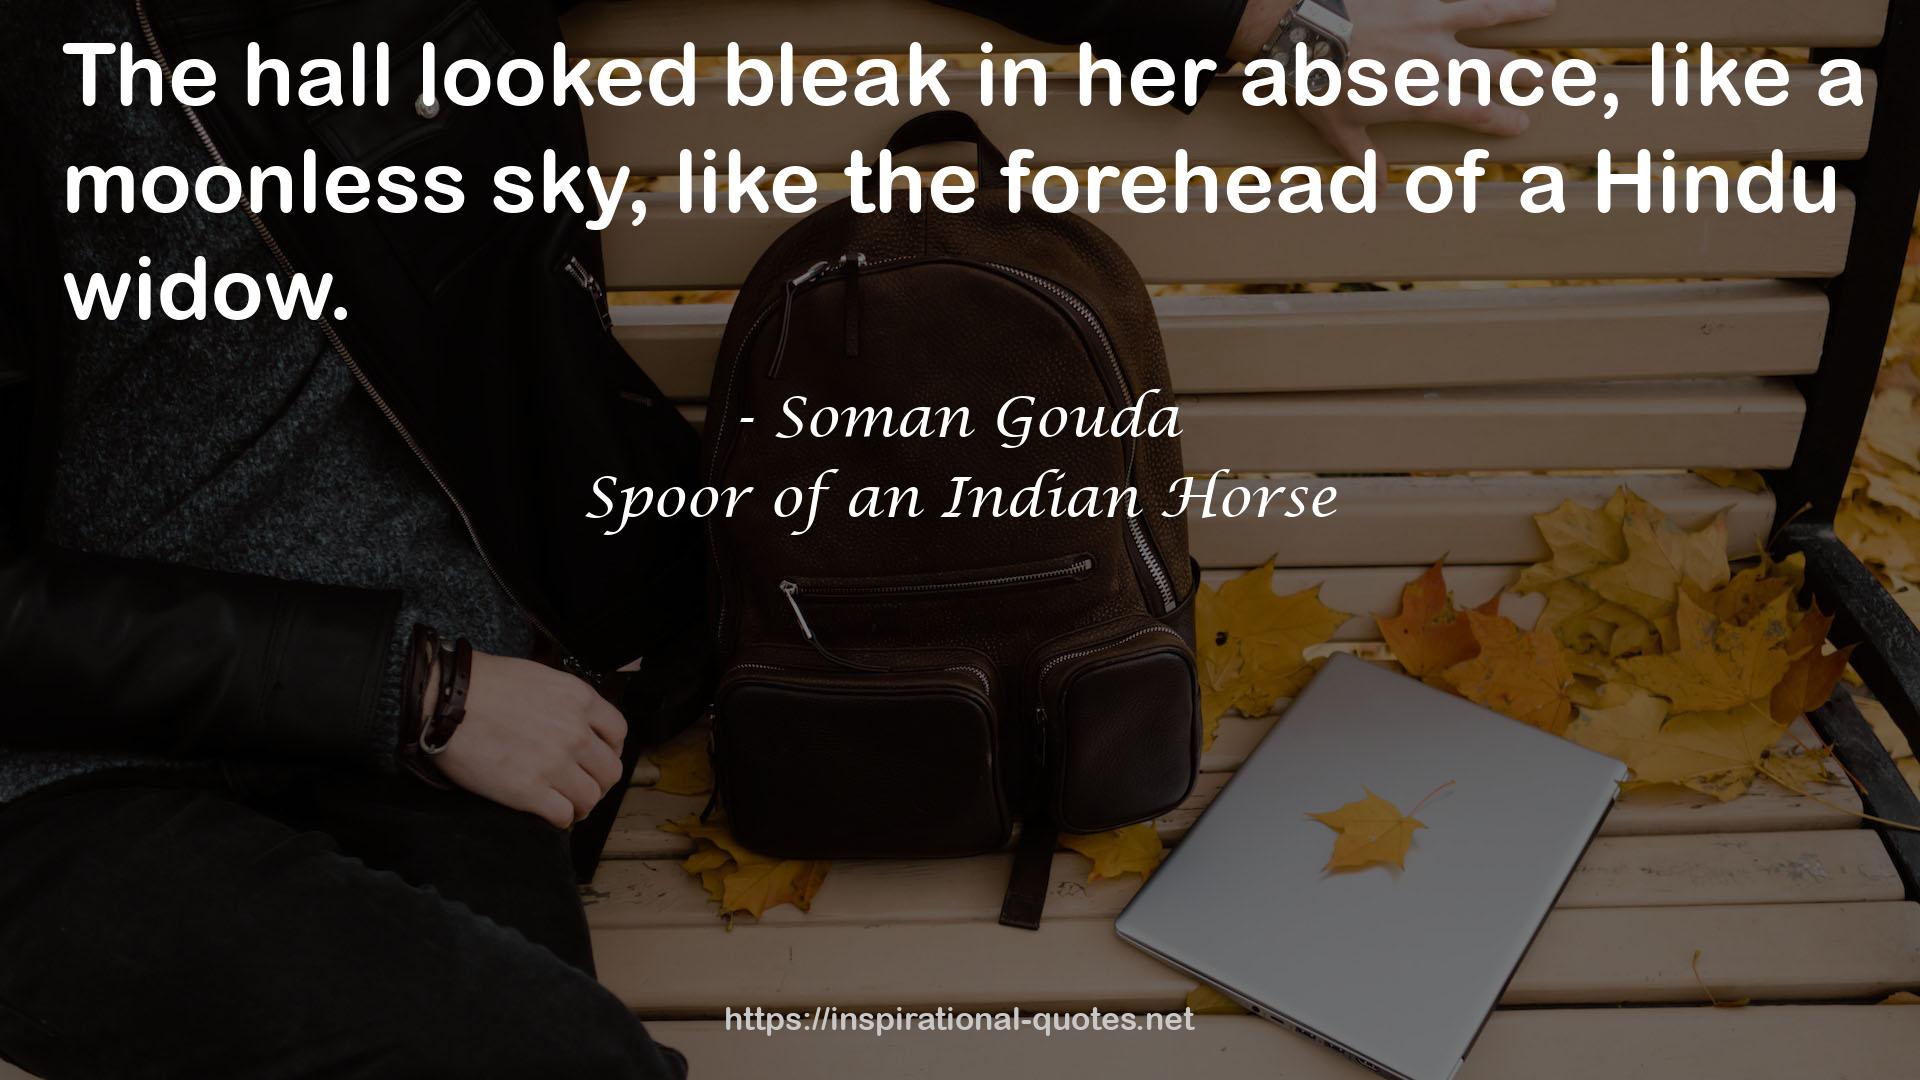 Spoor of an Indian Horse QUOTES